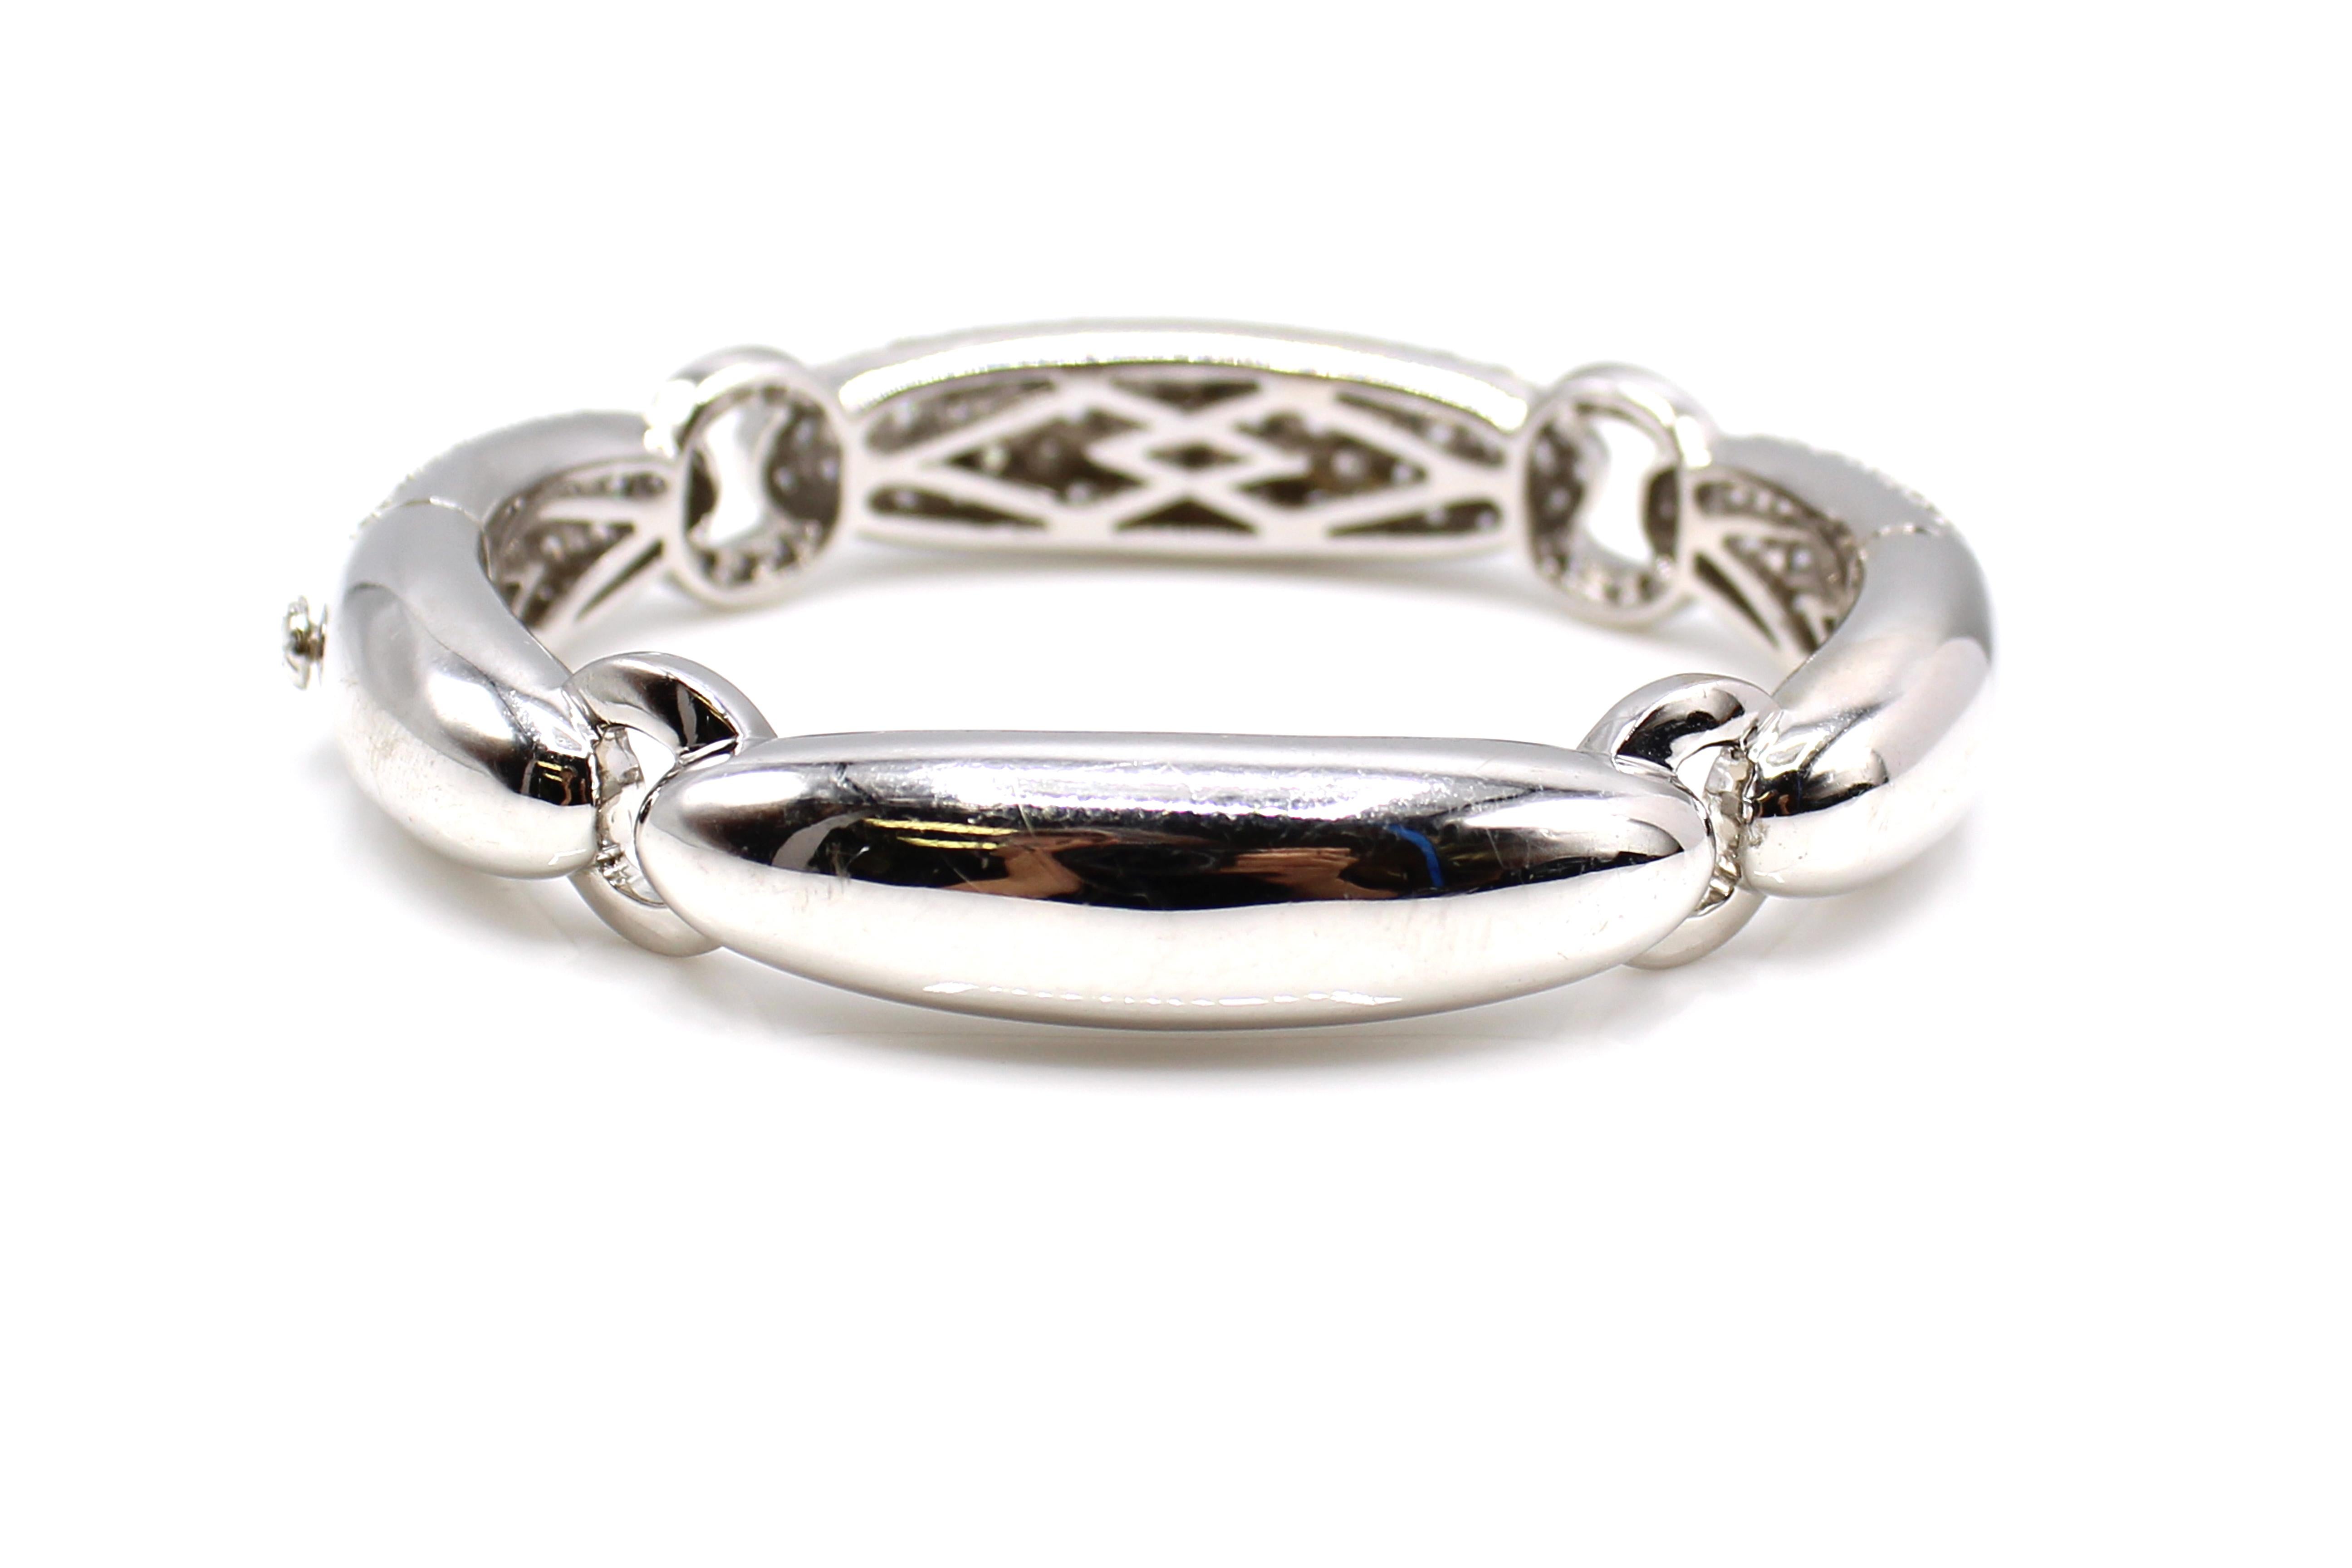 This amazingly well hand-crafted bangle bracelet is a true statement piece. A bold and chic design featuring 3 curved panels all meticulously pave set with perfectly matched bright white and sparkly round brilliant cut diamonds, each connected by